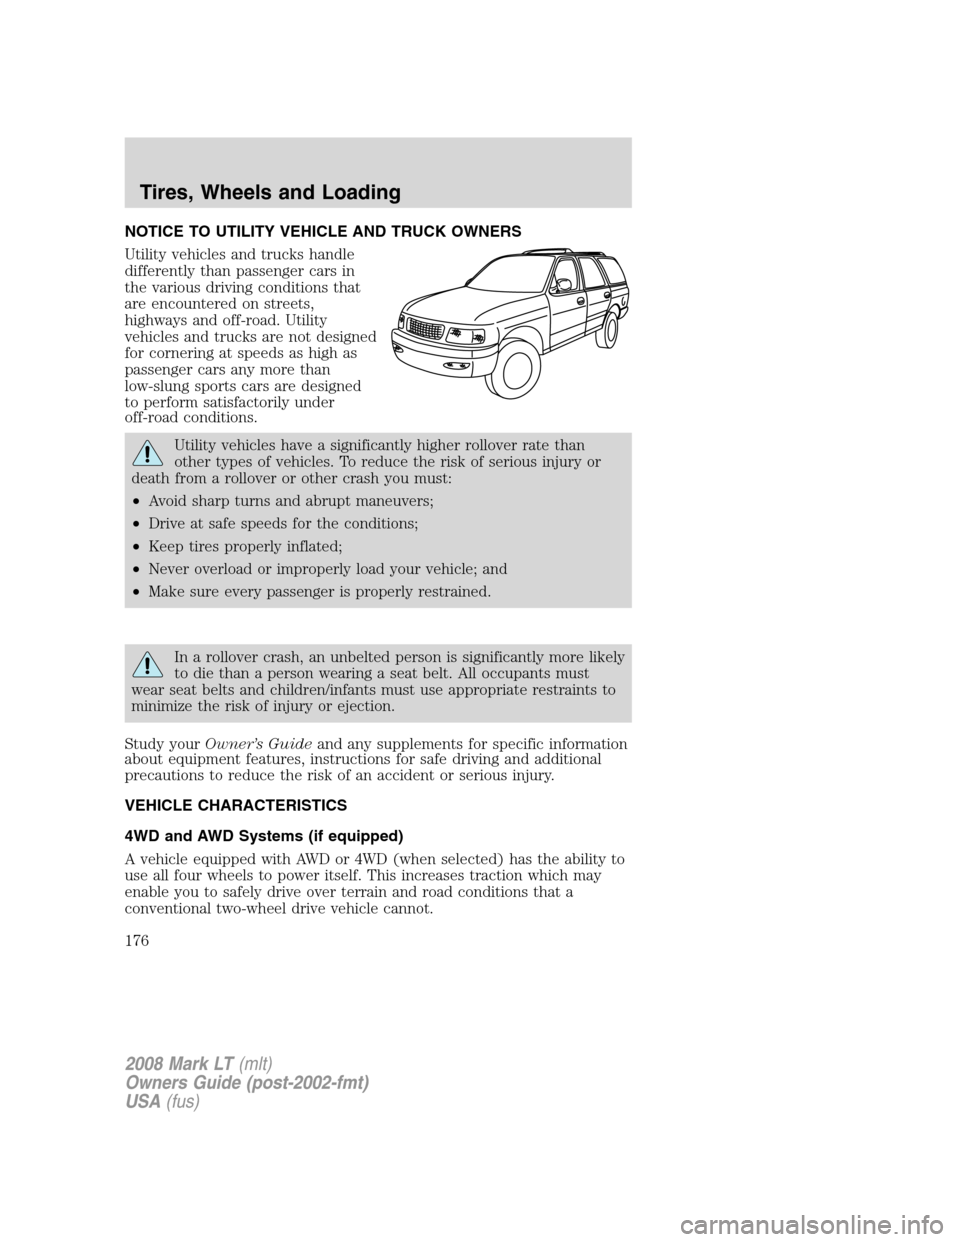 LINCOLN MARK LT 2008  Owners Manual NOTICE TO UTILITY VEHICLE AND TRUCK OWNERS
Utility vehicles and trucks handle
differently than passenger cars in
the various driving conditions that
are encountered on streets,
highways and off-road. 